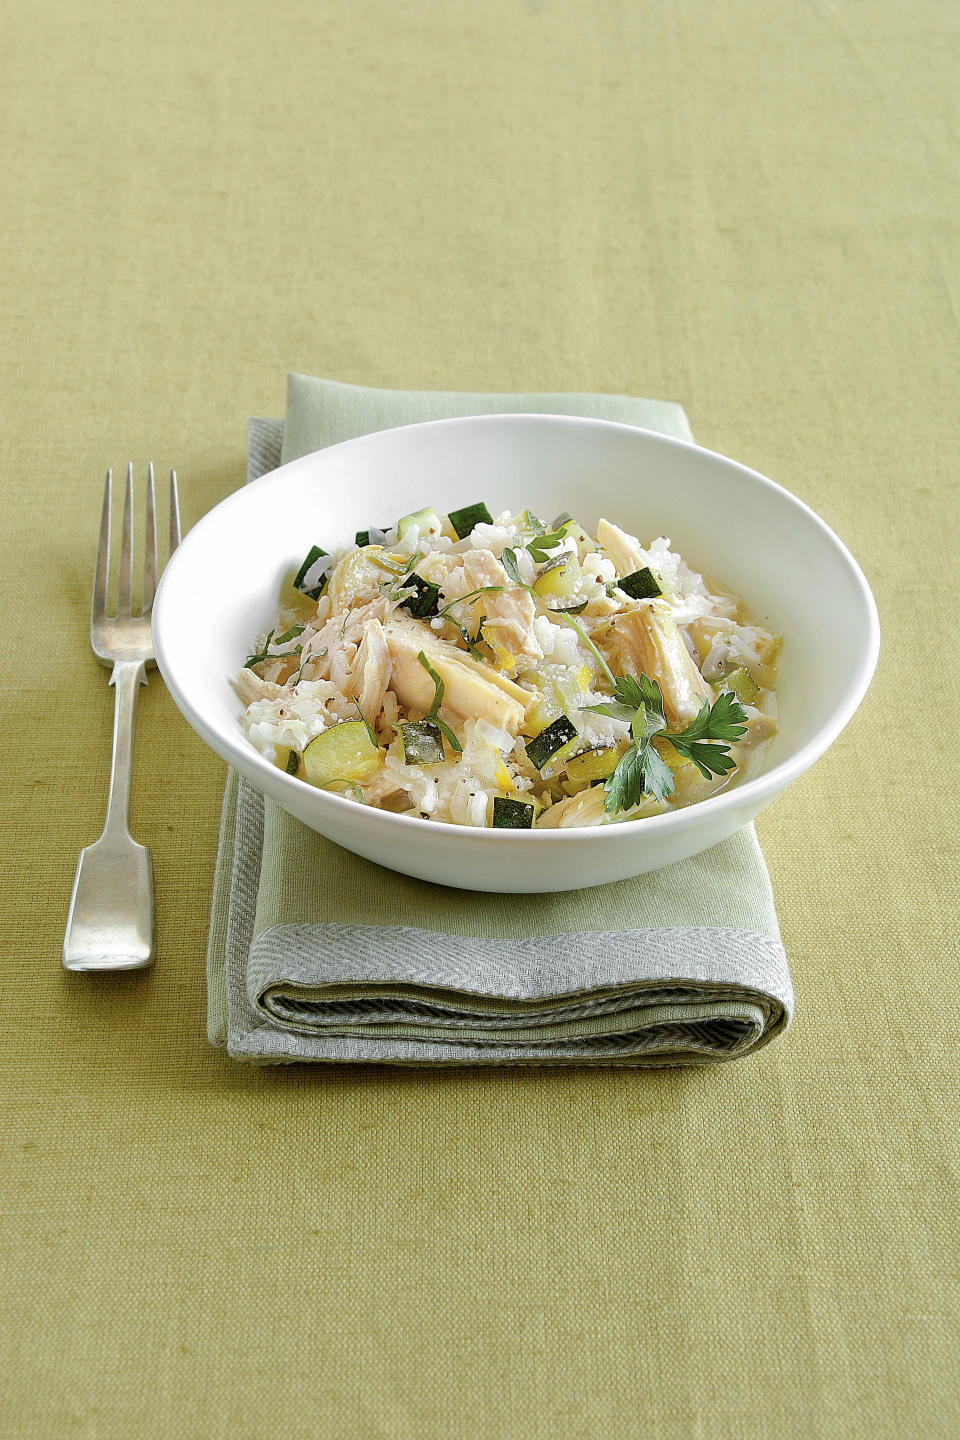 Baked Chicken Risotto